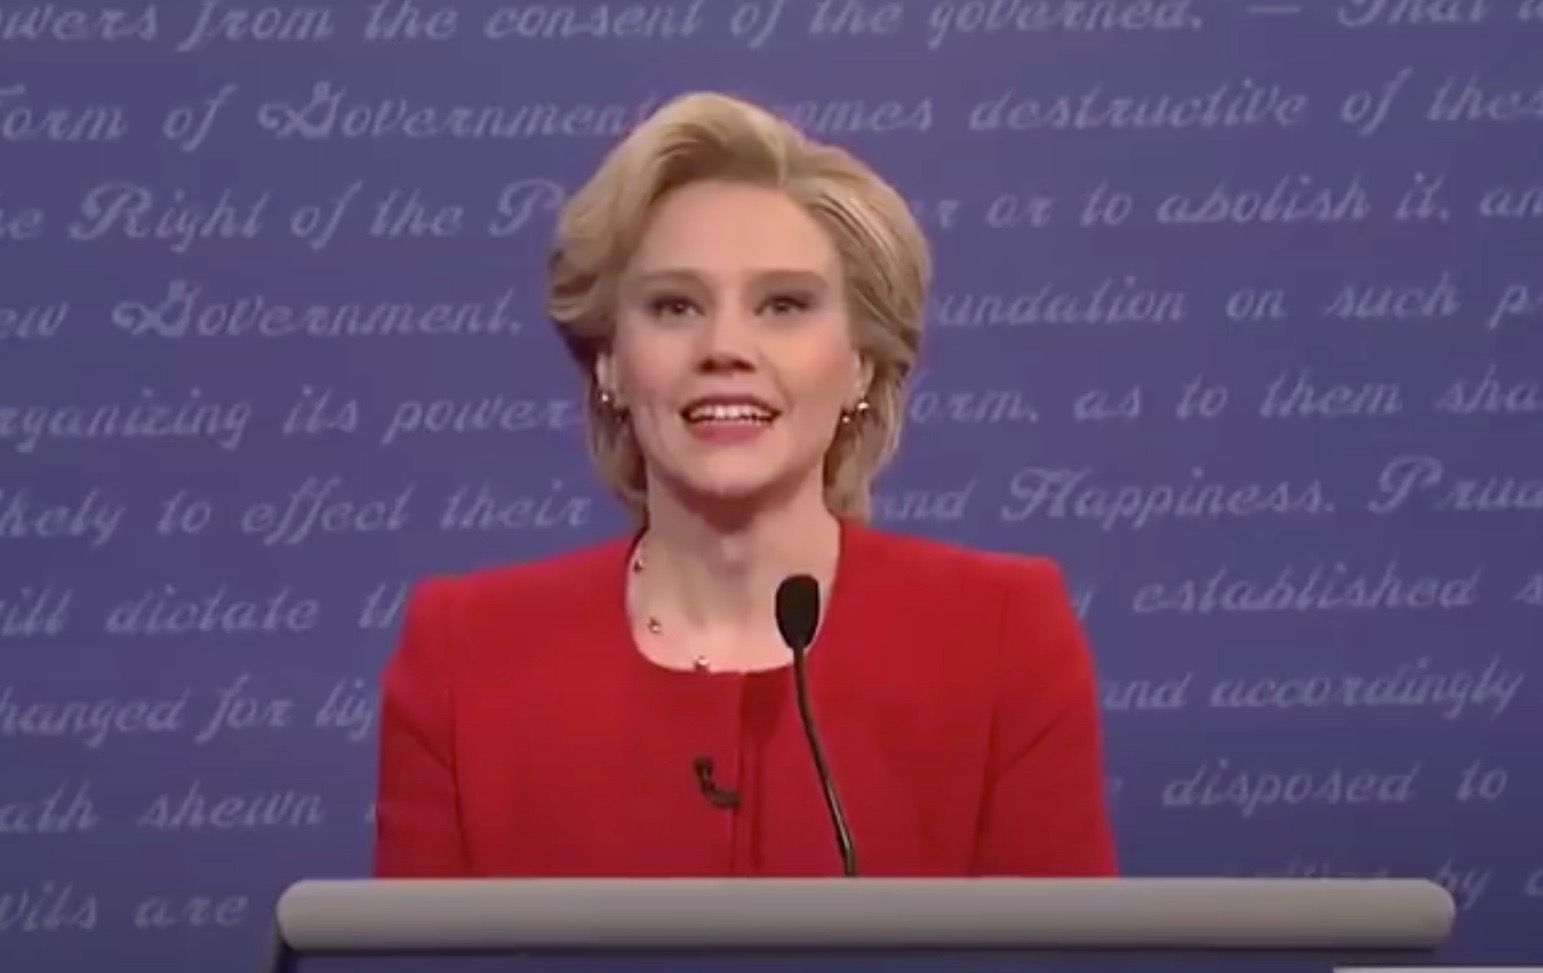 Kate McKinnon dressed up as Hilary Clinton on SNL.